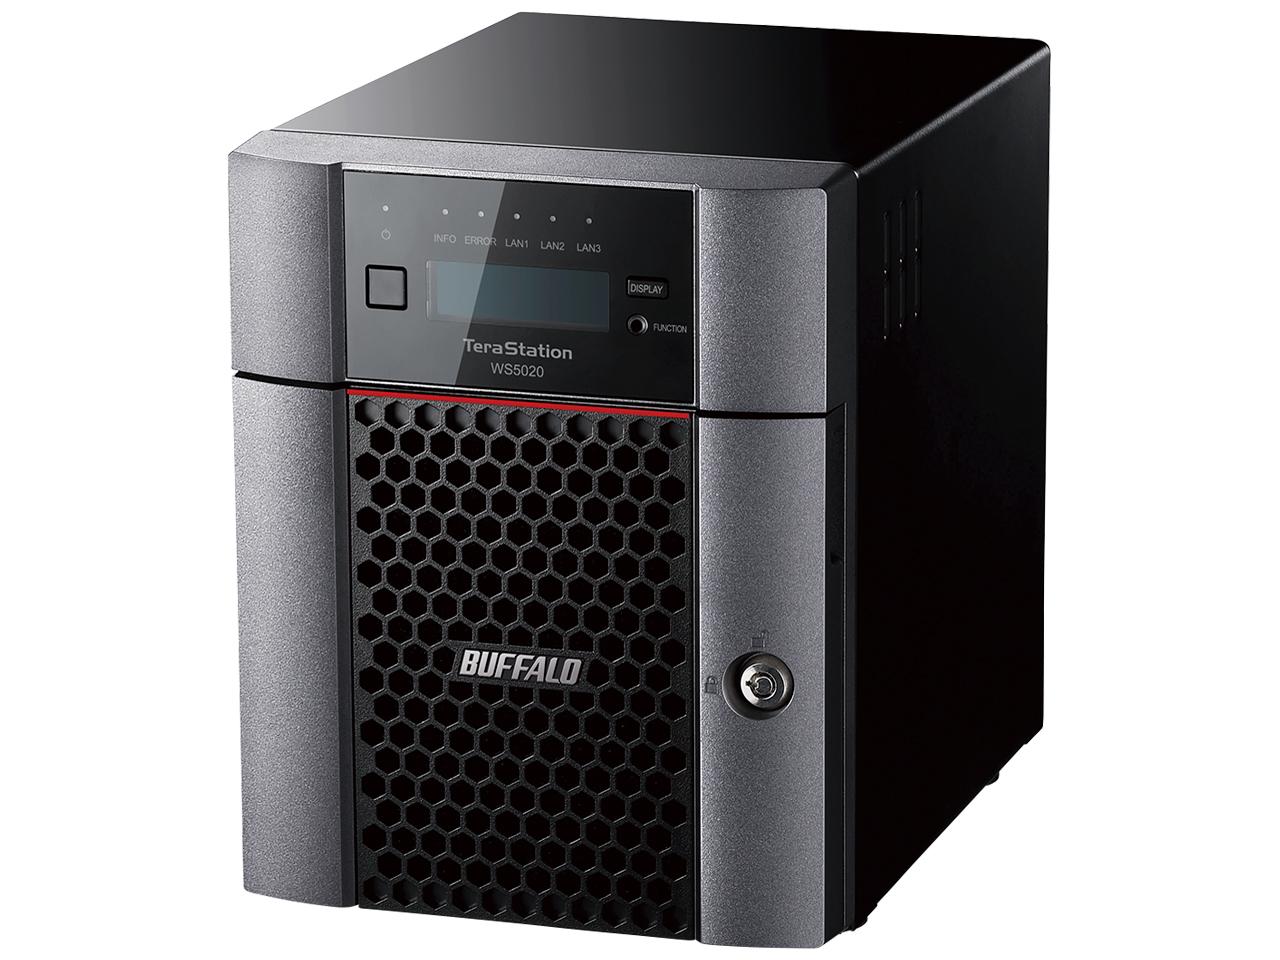  Windows@Server@IoT@2019@for@Storage@Workgroup@Editionځ@4xCfXNgbvNAS@16TB  WS5420DN16W9 1